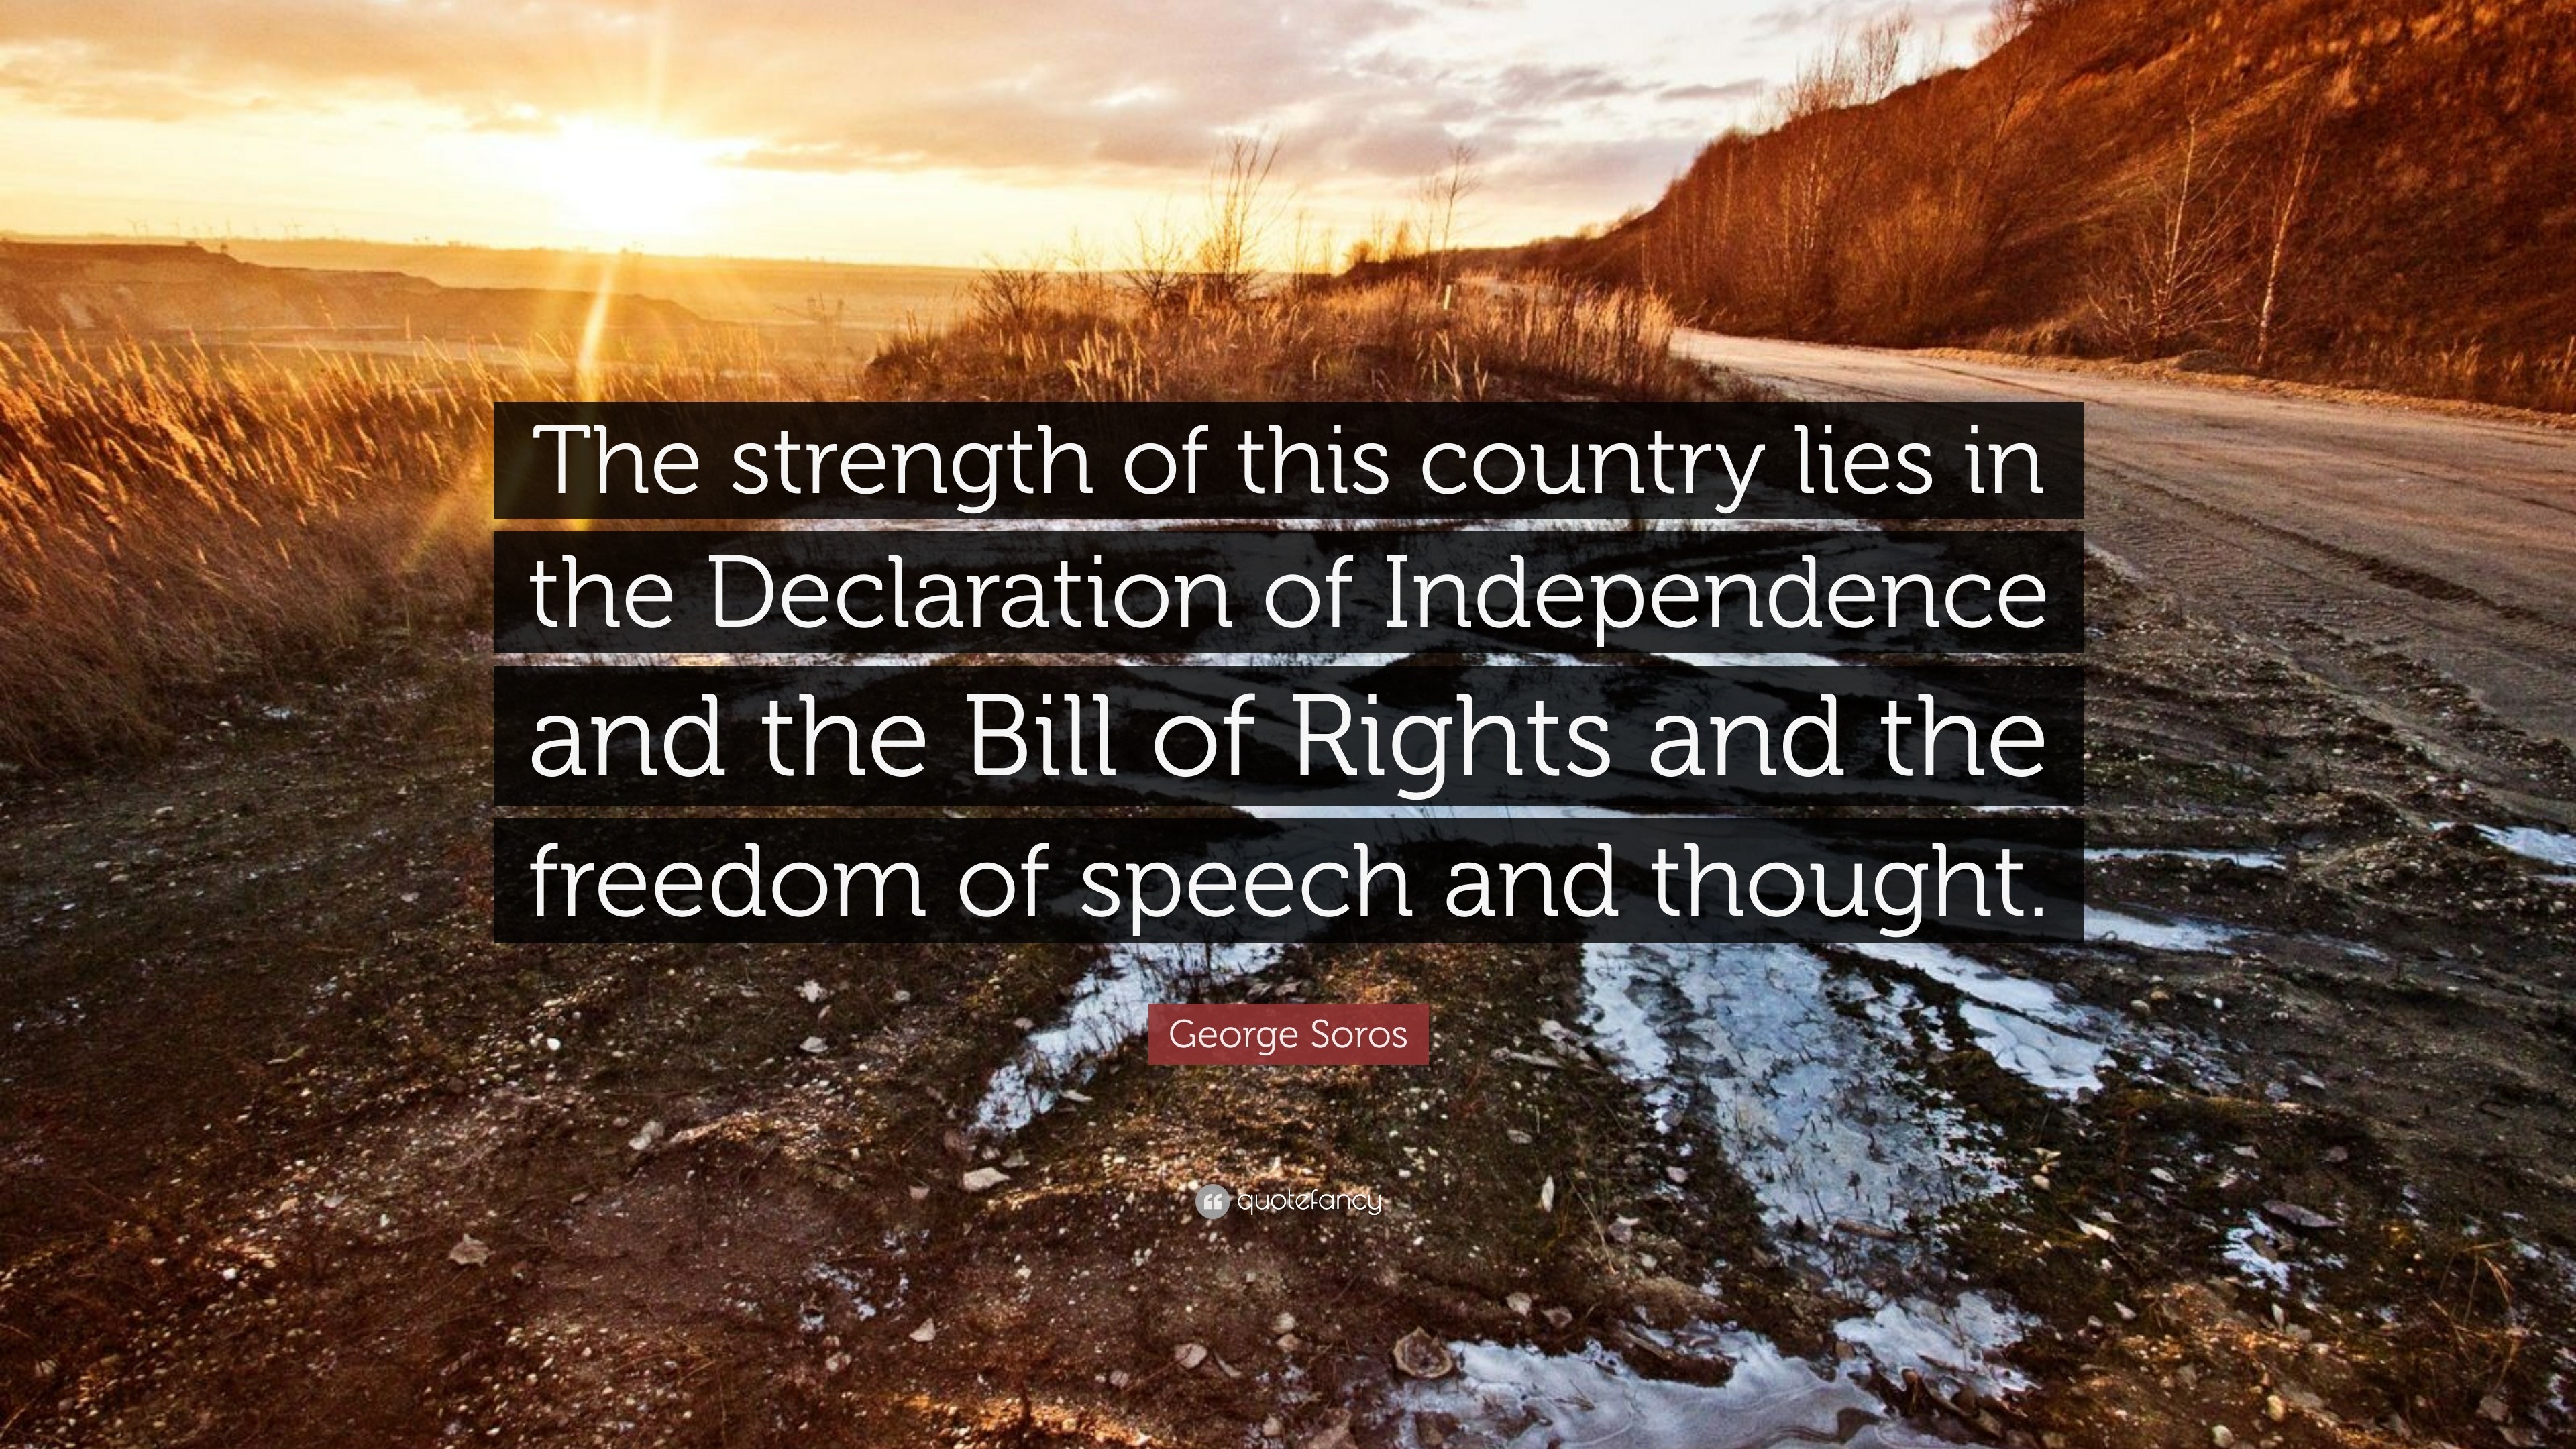 3840x2160 George Soros Quote: “The strength of this country lies in the Declaration  of Independence